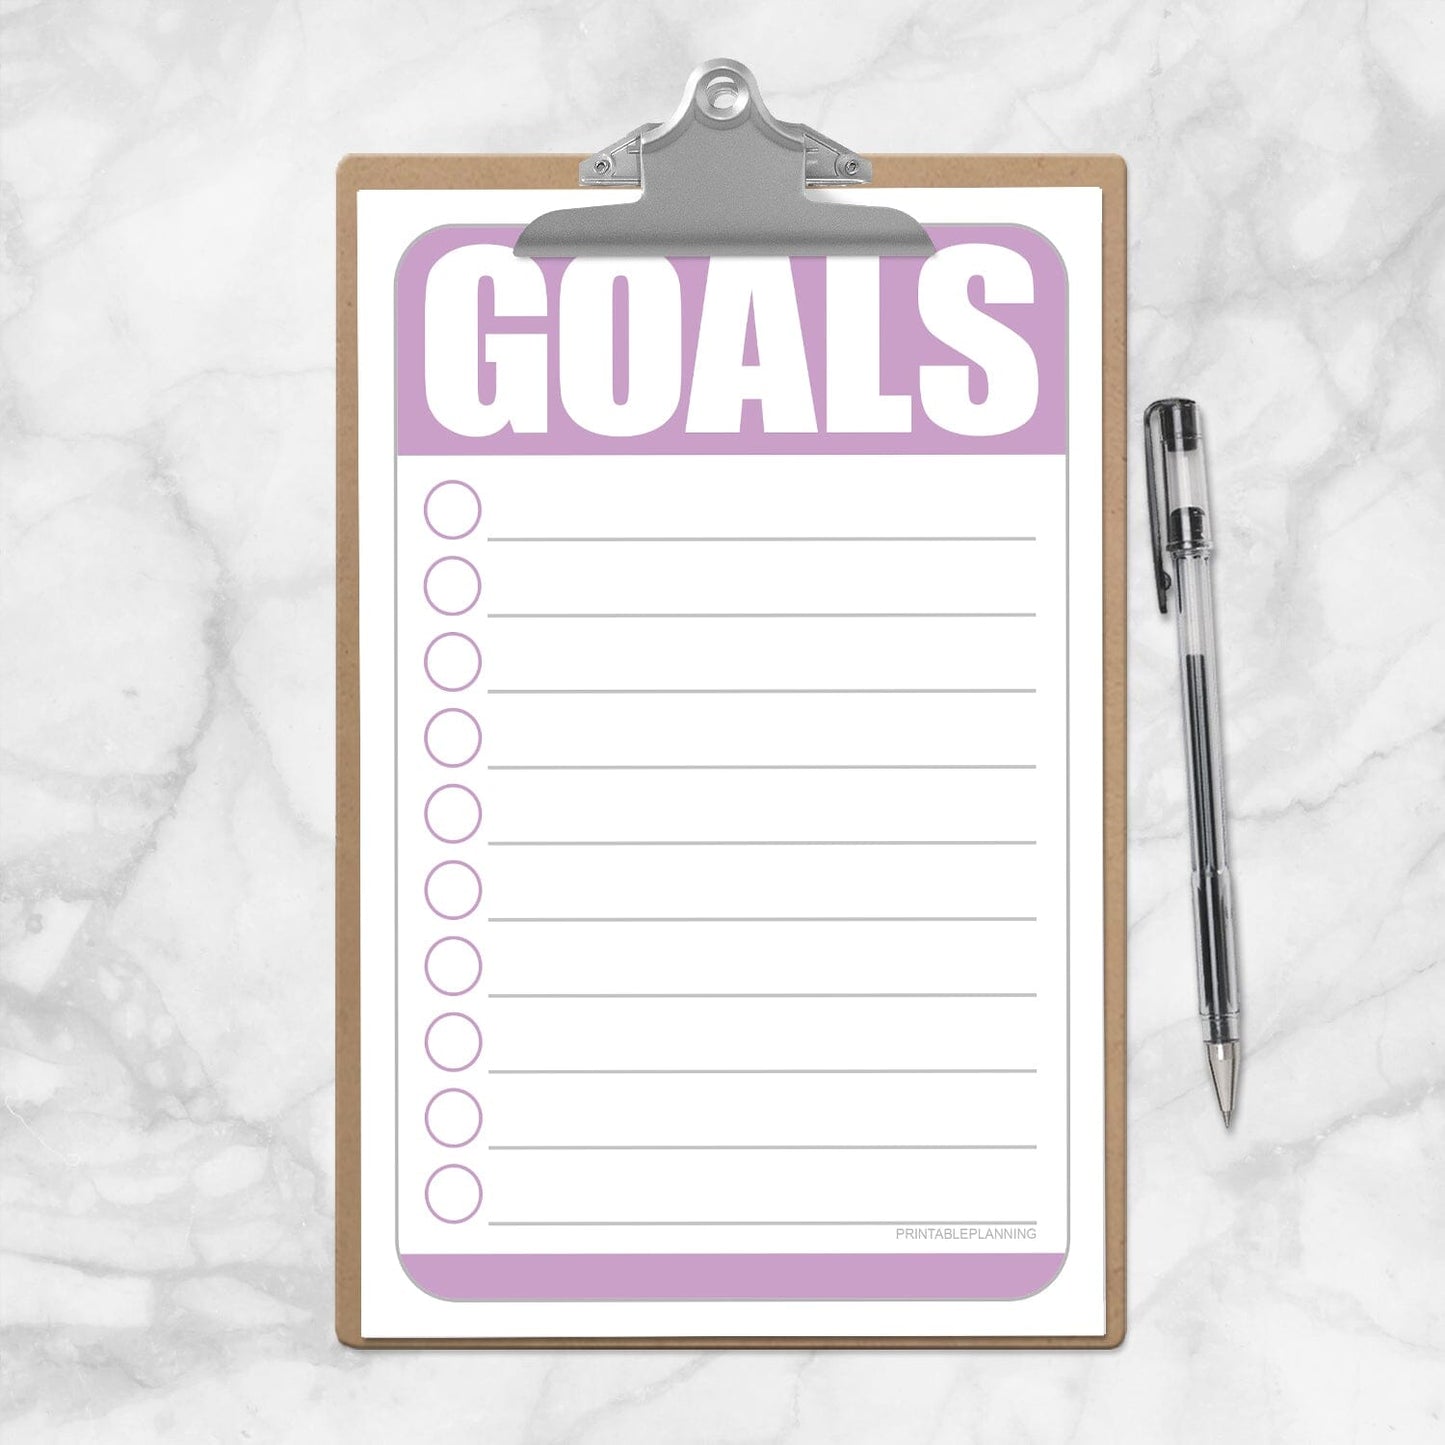 Printable Goals - Purple Half Page Checklist at Printable Planning. Photo shows half size page on mini clipboard.